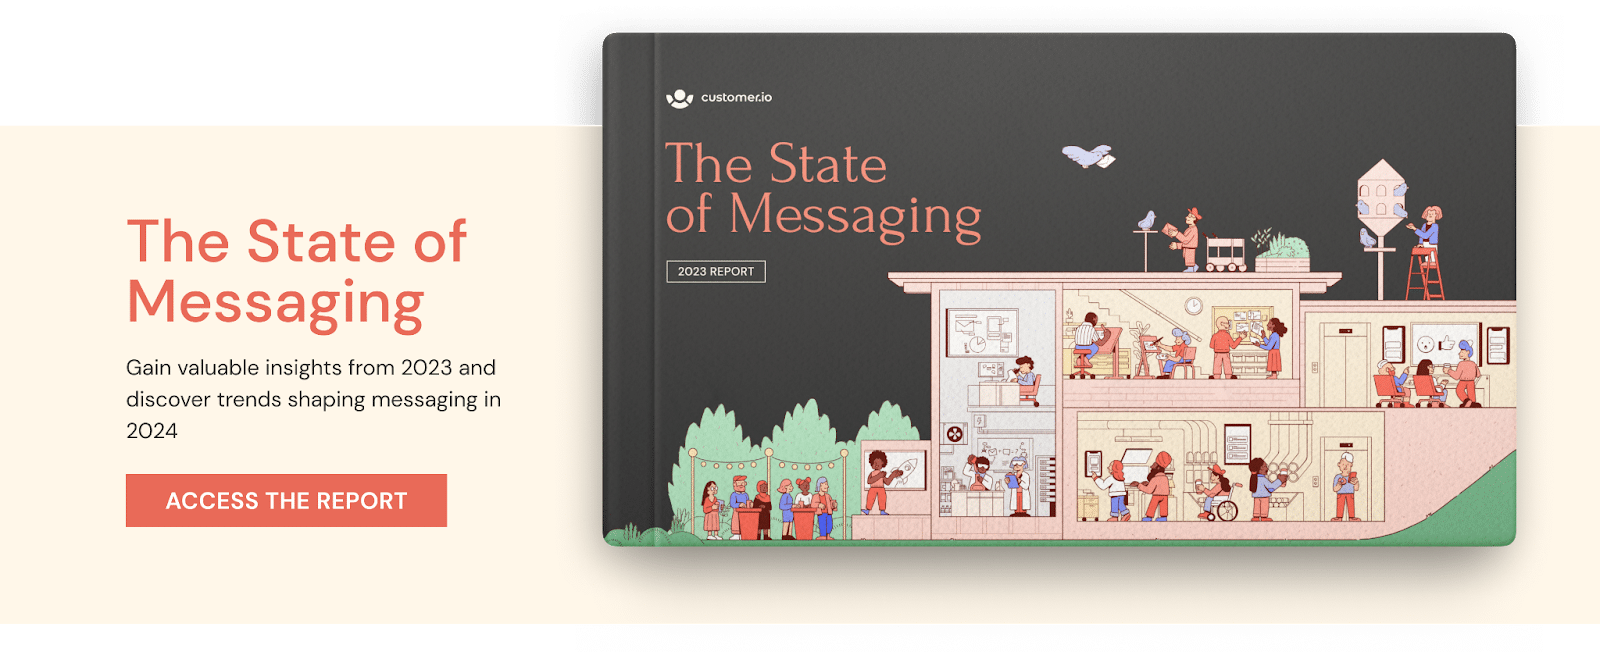 The State of Messaging Report 2023